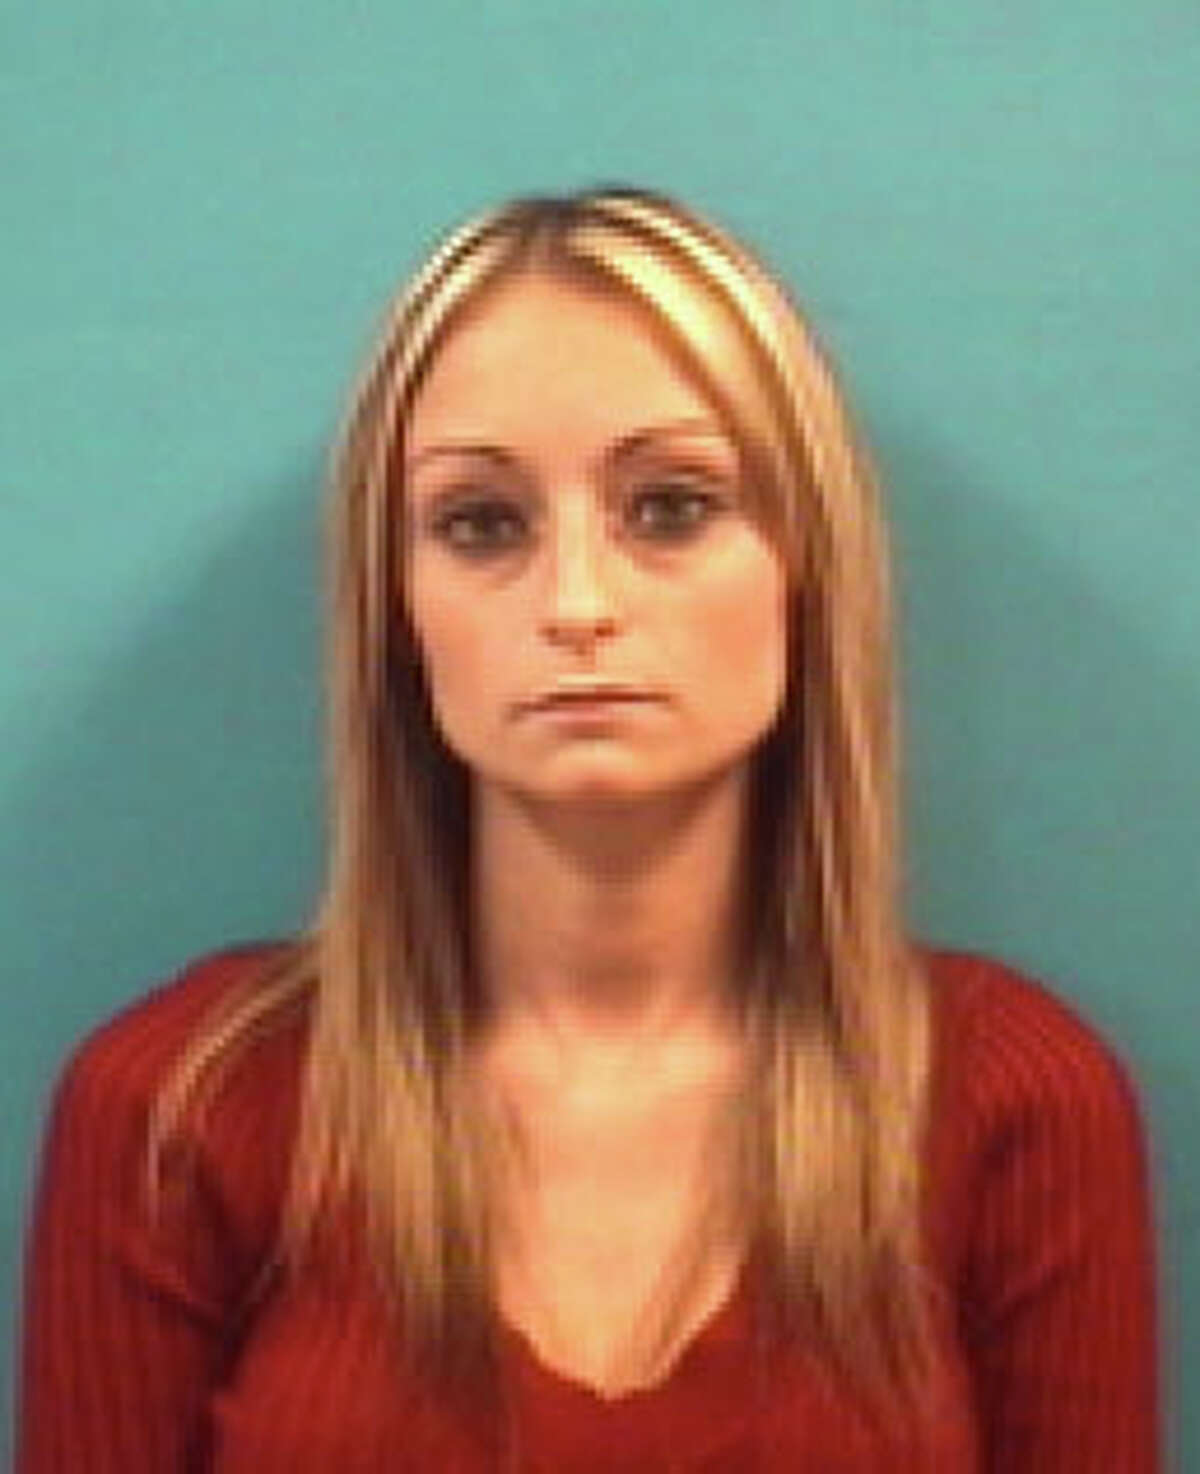 Julia Lack, 26, of Pearland, was arrested about noon Thursday by Pearland police and charged with one count of possession of child pornography. She is the girlfriend of Tad Jeremy Costin, 41, who was arrested Nov. 1 by a multi-agency group of law enforcement officers at his Pearland home. He has been charged with four counts of aggravated sexual assault of a child under age 14.